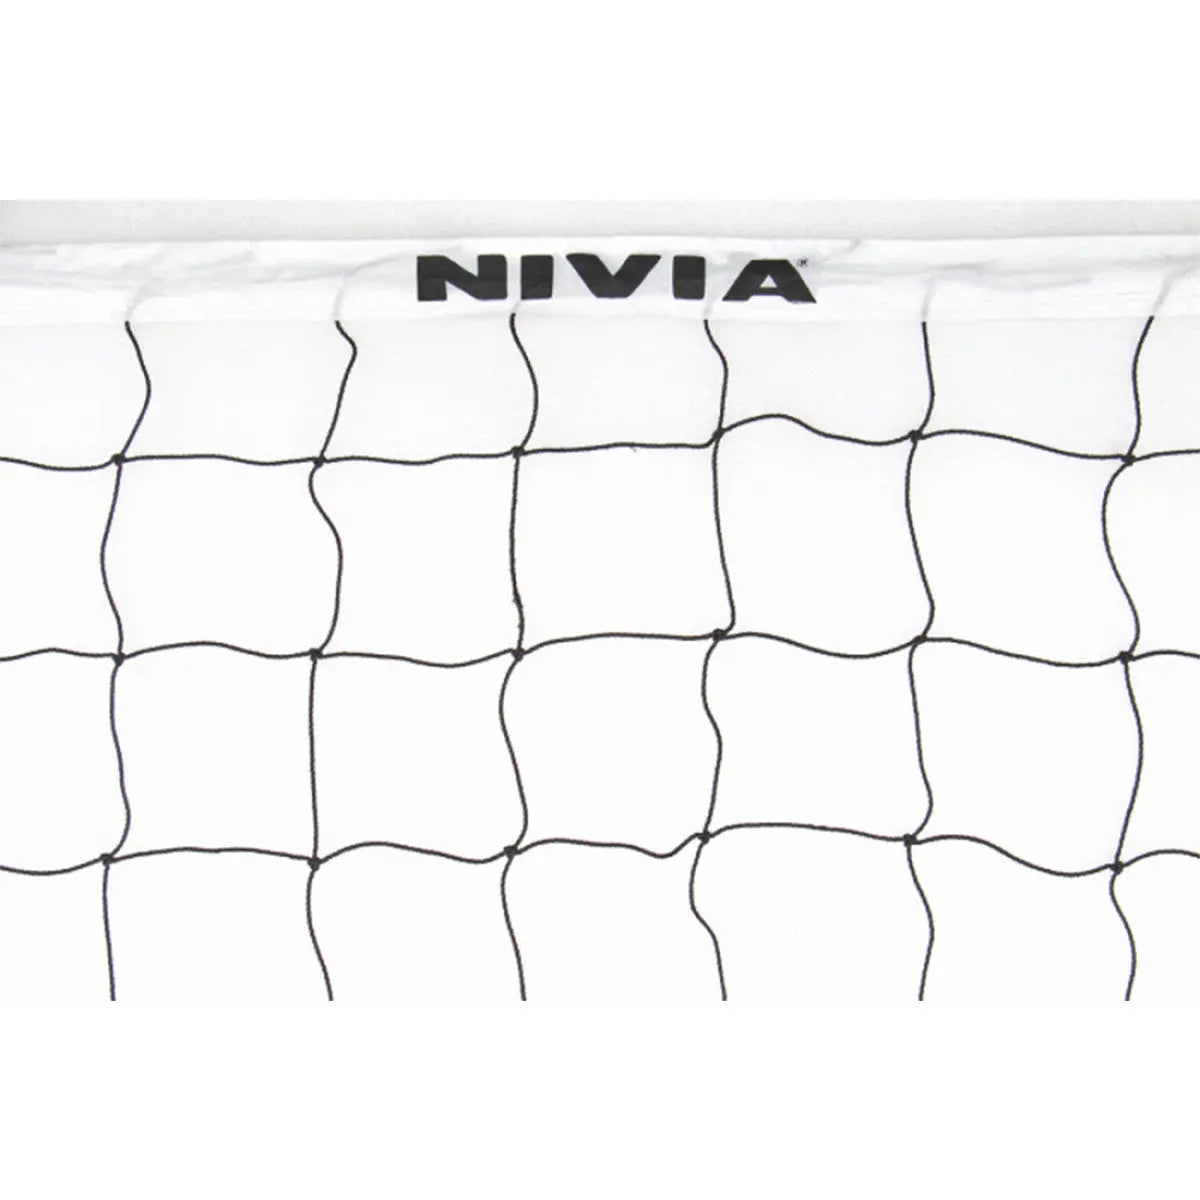 NIVIA Volleyball  9.5x1.0M Net Material PE without Knot 1 Side Tape playmonks